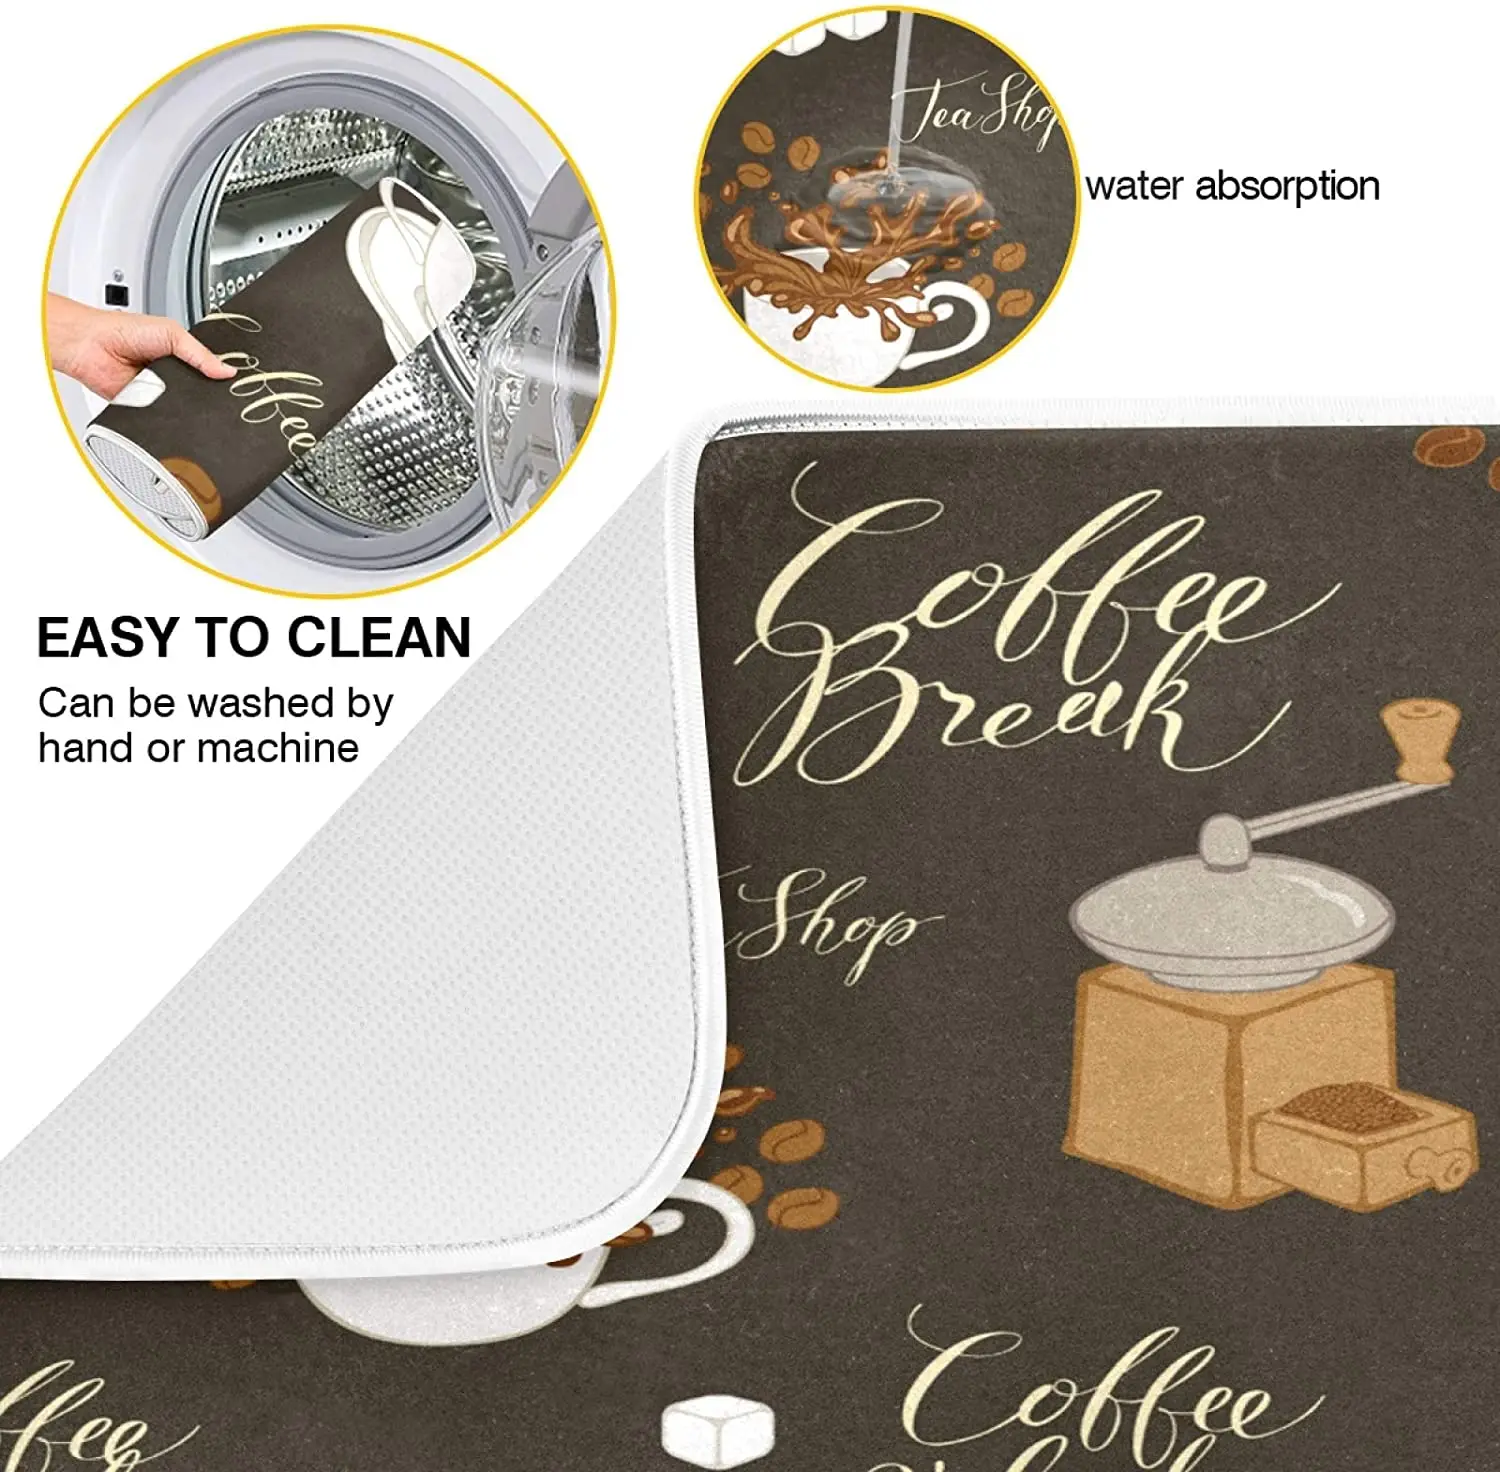 https://ae01.alicdn.com/kf/S0e52251ab64c4ab4a44b444fb174c5b2O/Coffee-Beans-Dish-Drying-Mat-for-Kitchen-Counter-18x24-Inch-Absorbent-Microfiber-Dry-Dishes-Mats-Drainer.jpg